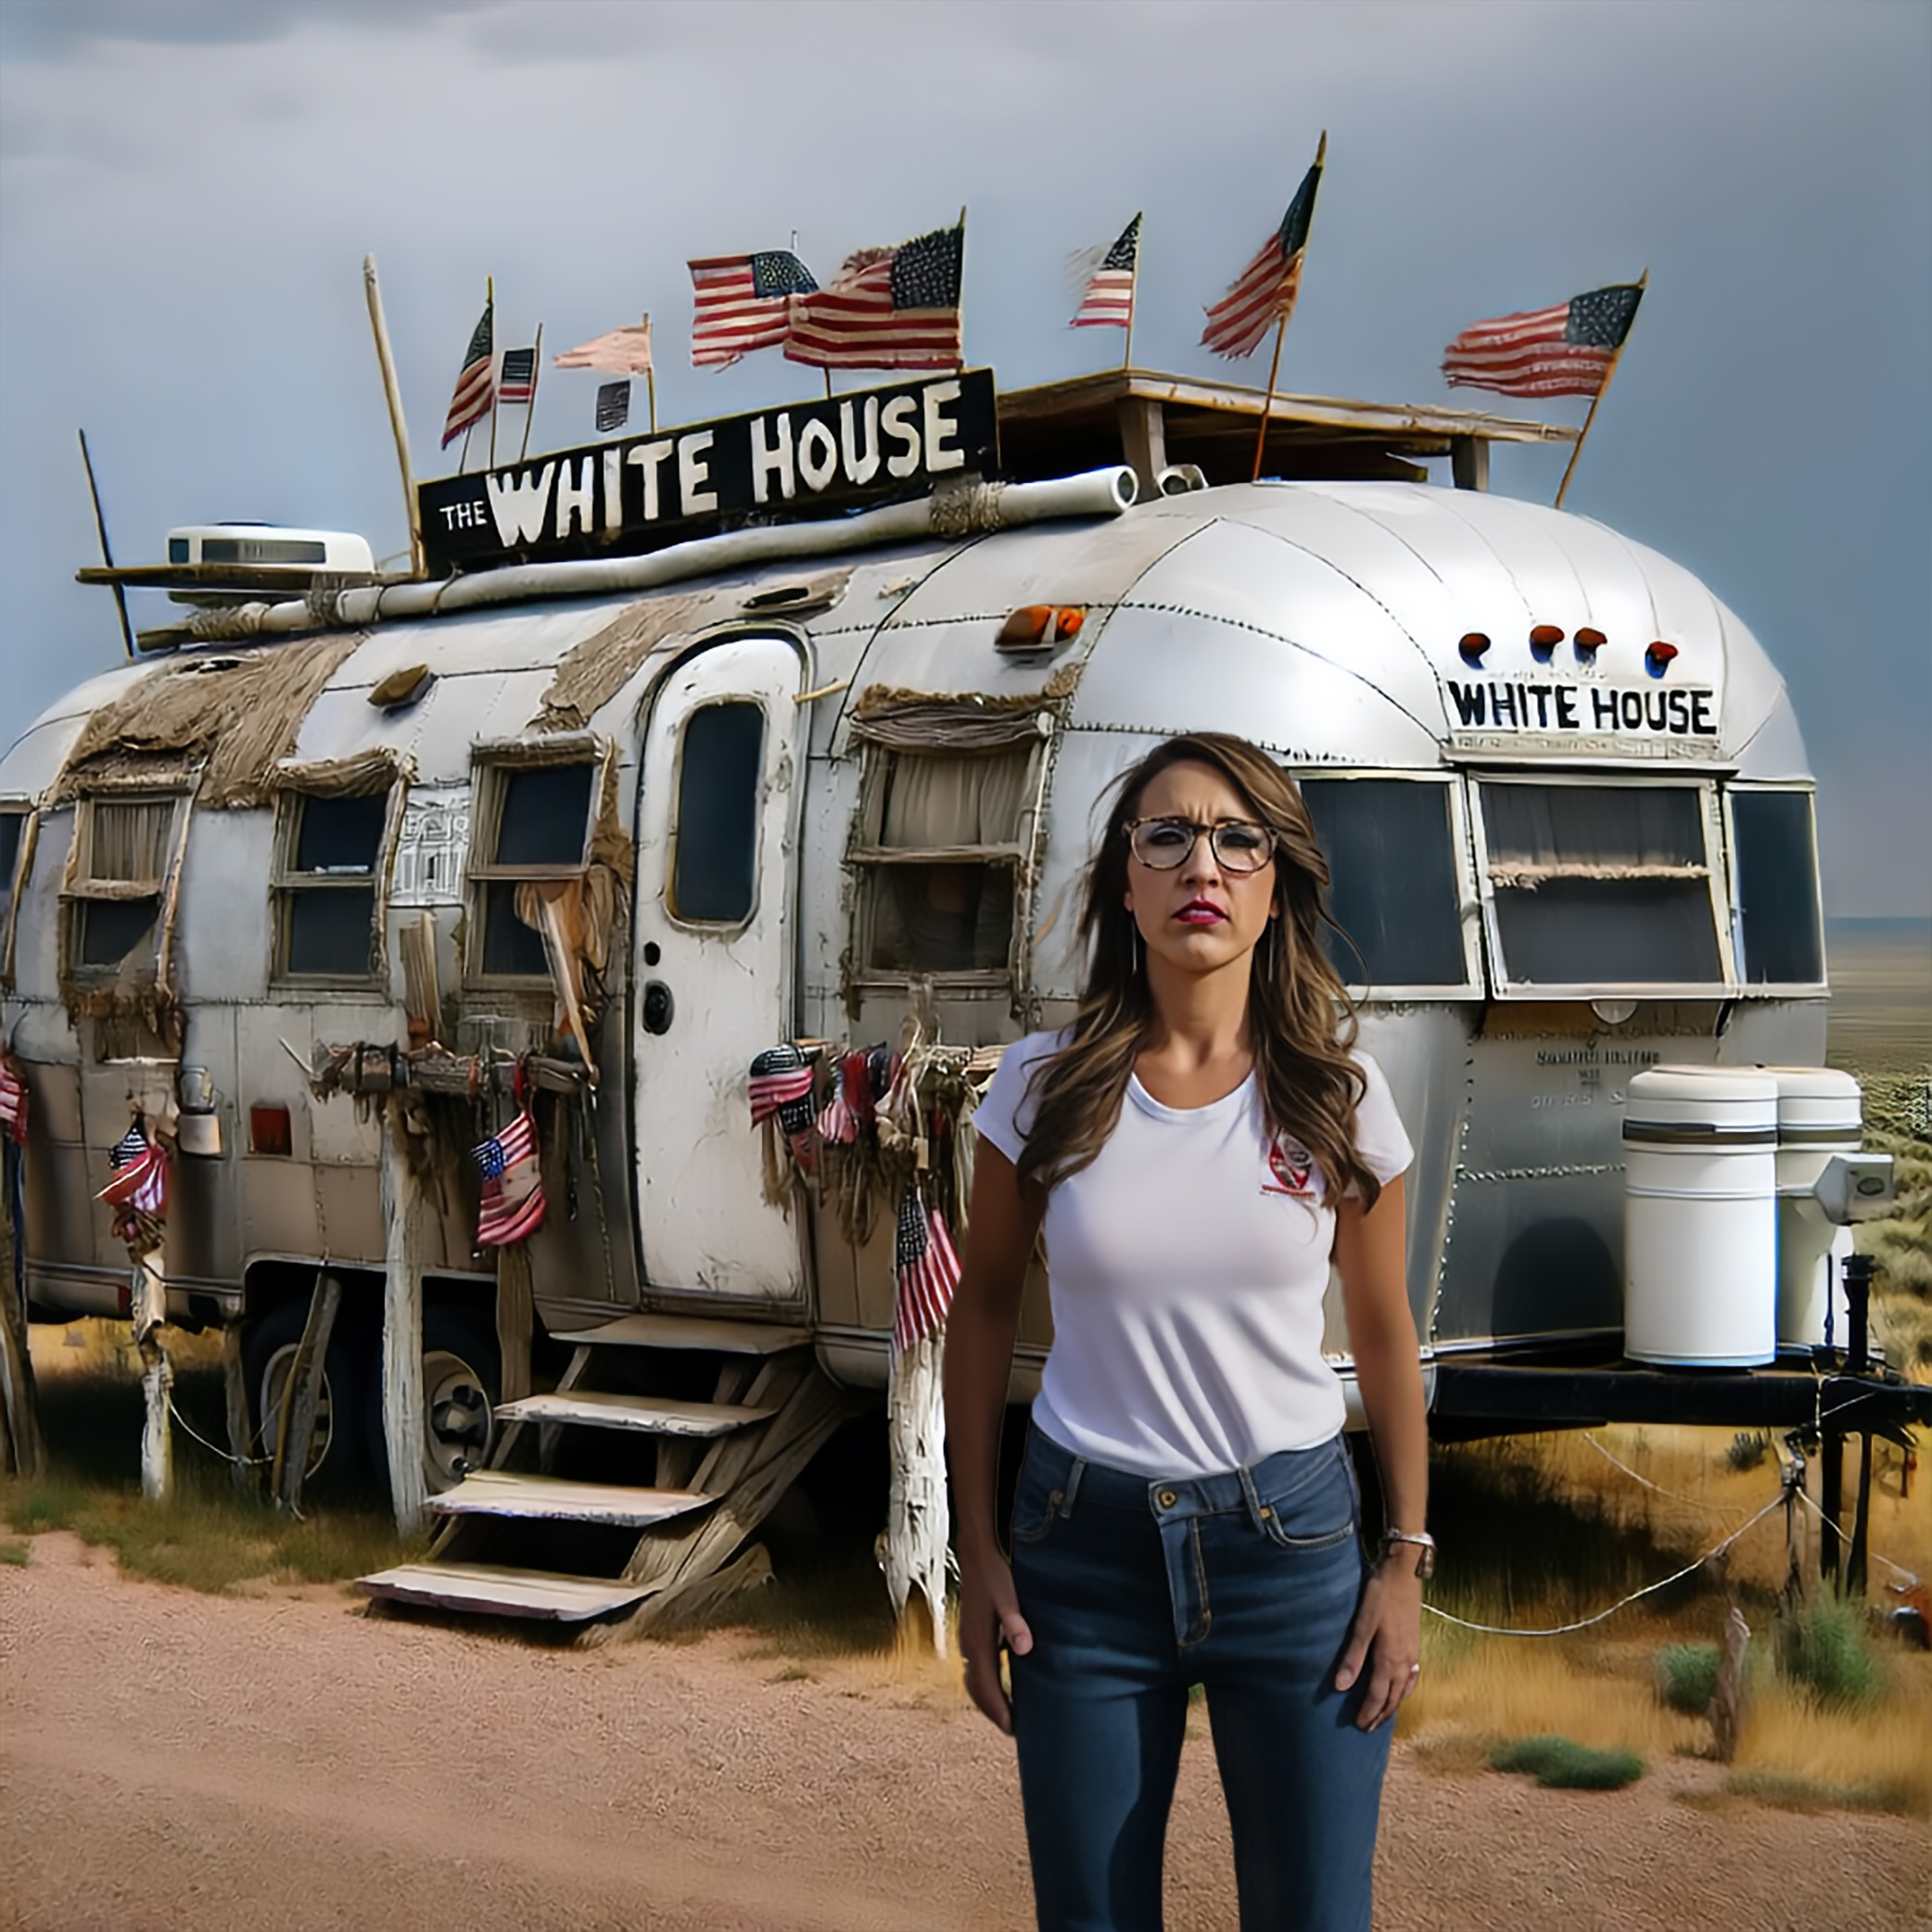 A woman stands in front of a dilapidated vintage trailer adorned with American flags and a sign reading "The White House".